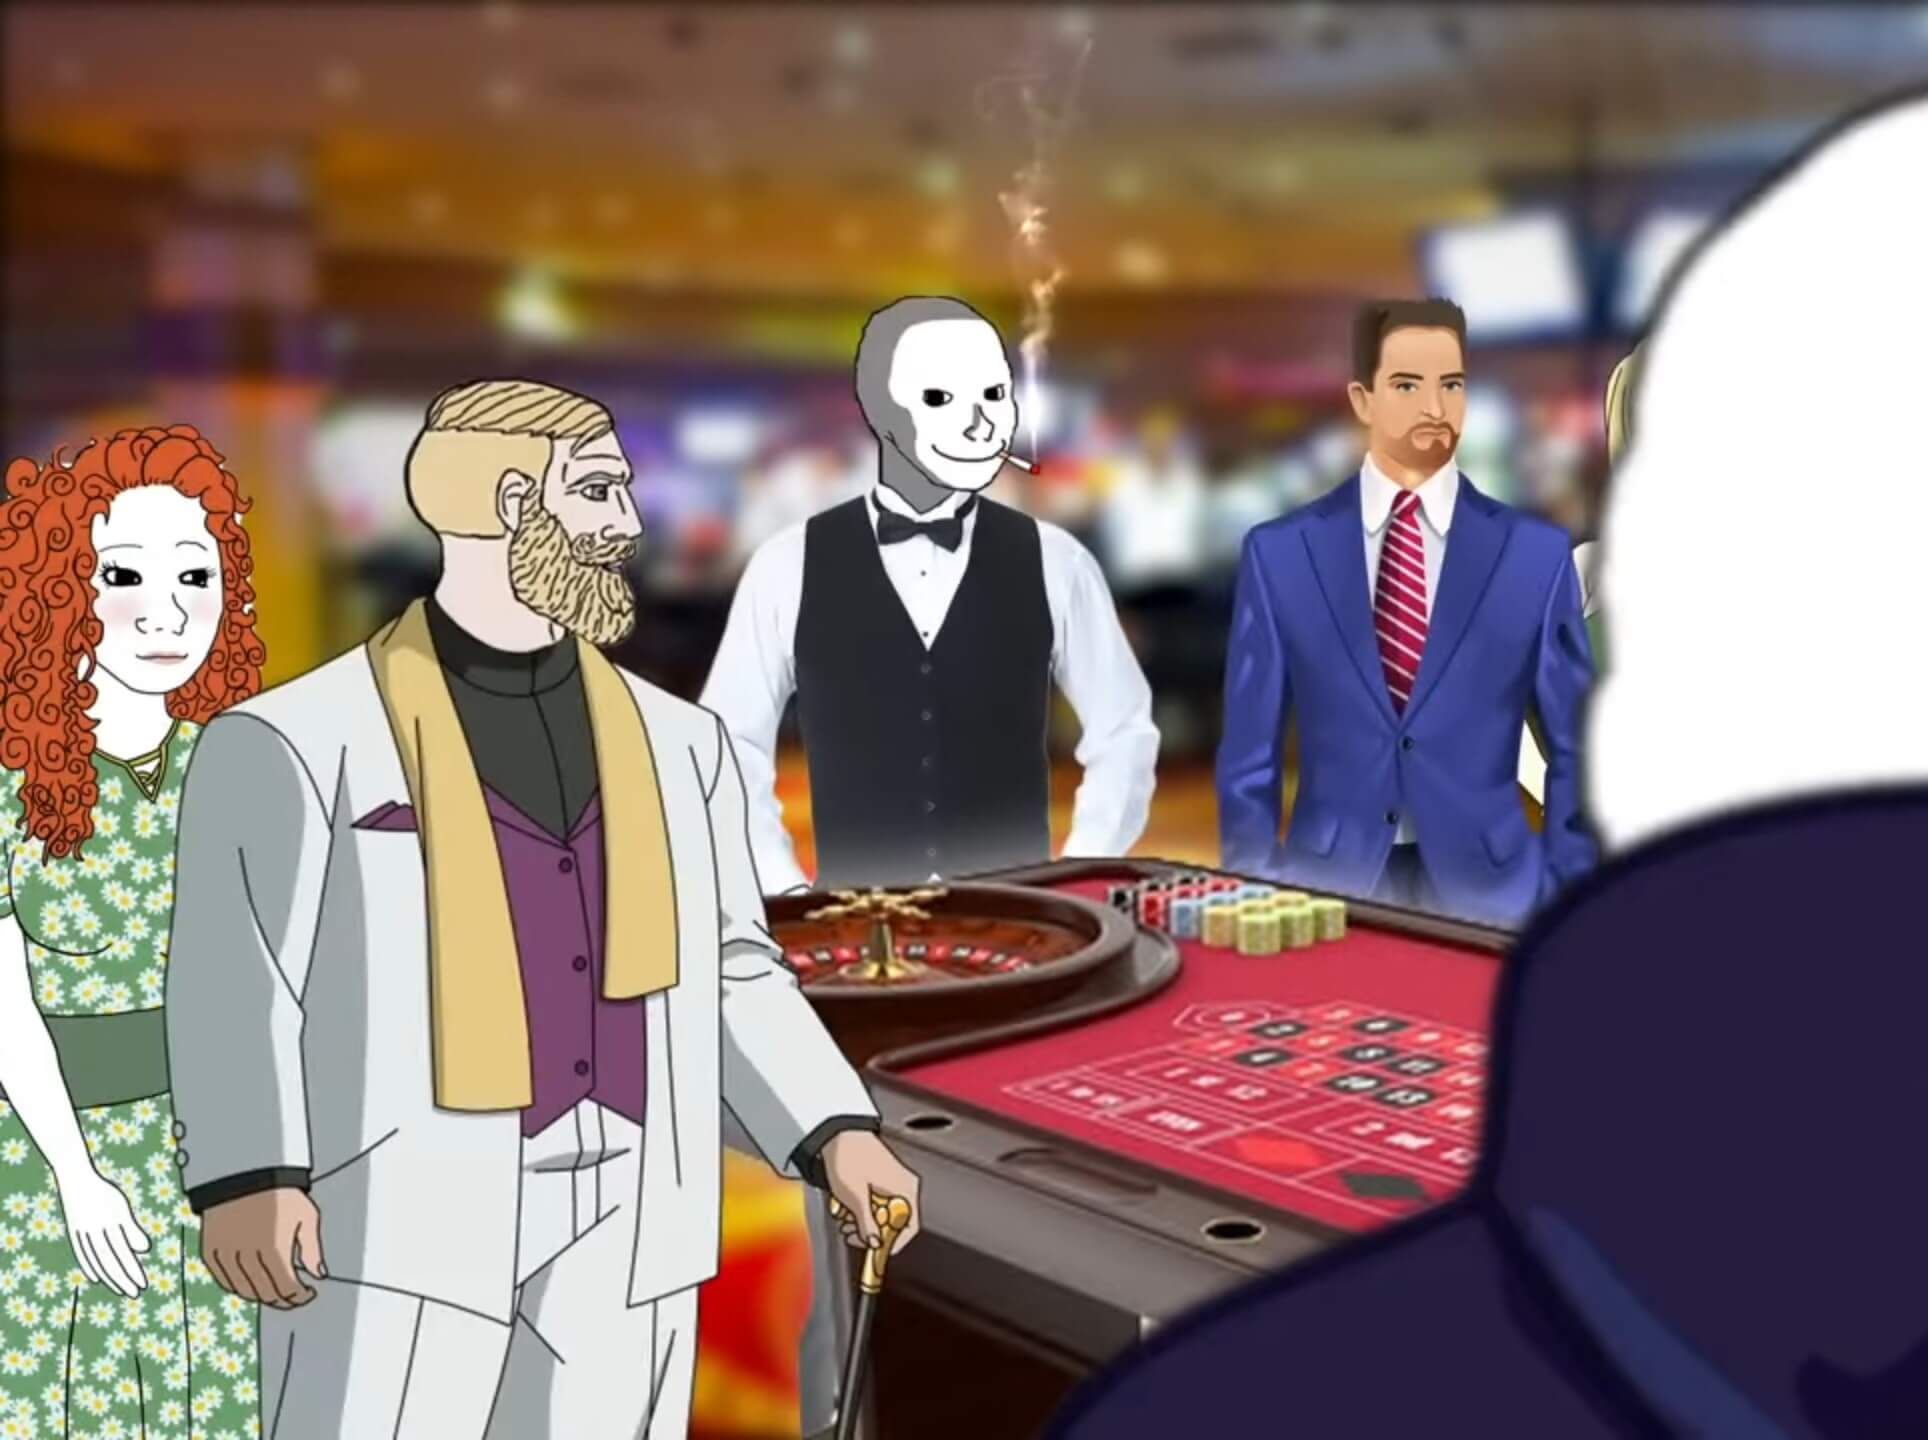 The Roulette Loss: A Thrilling Tale of Wojak, Boomer, and Chad in a Haunted Casino